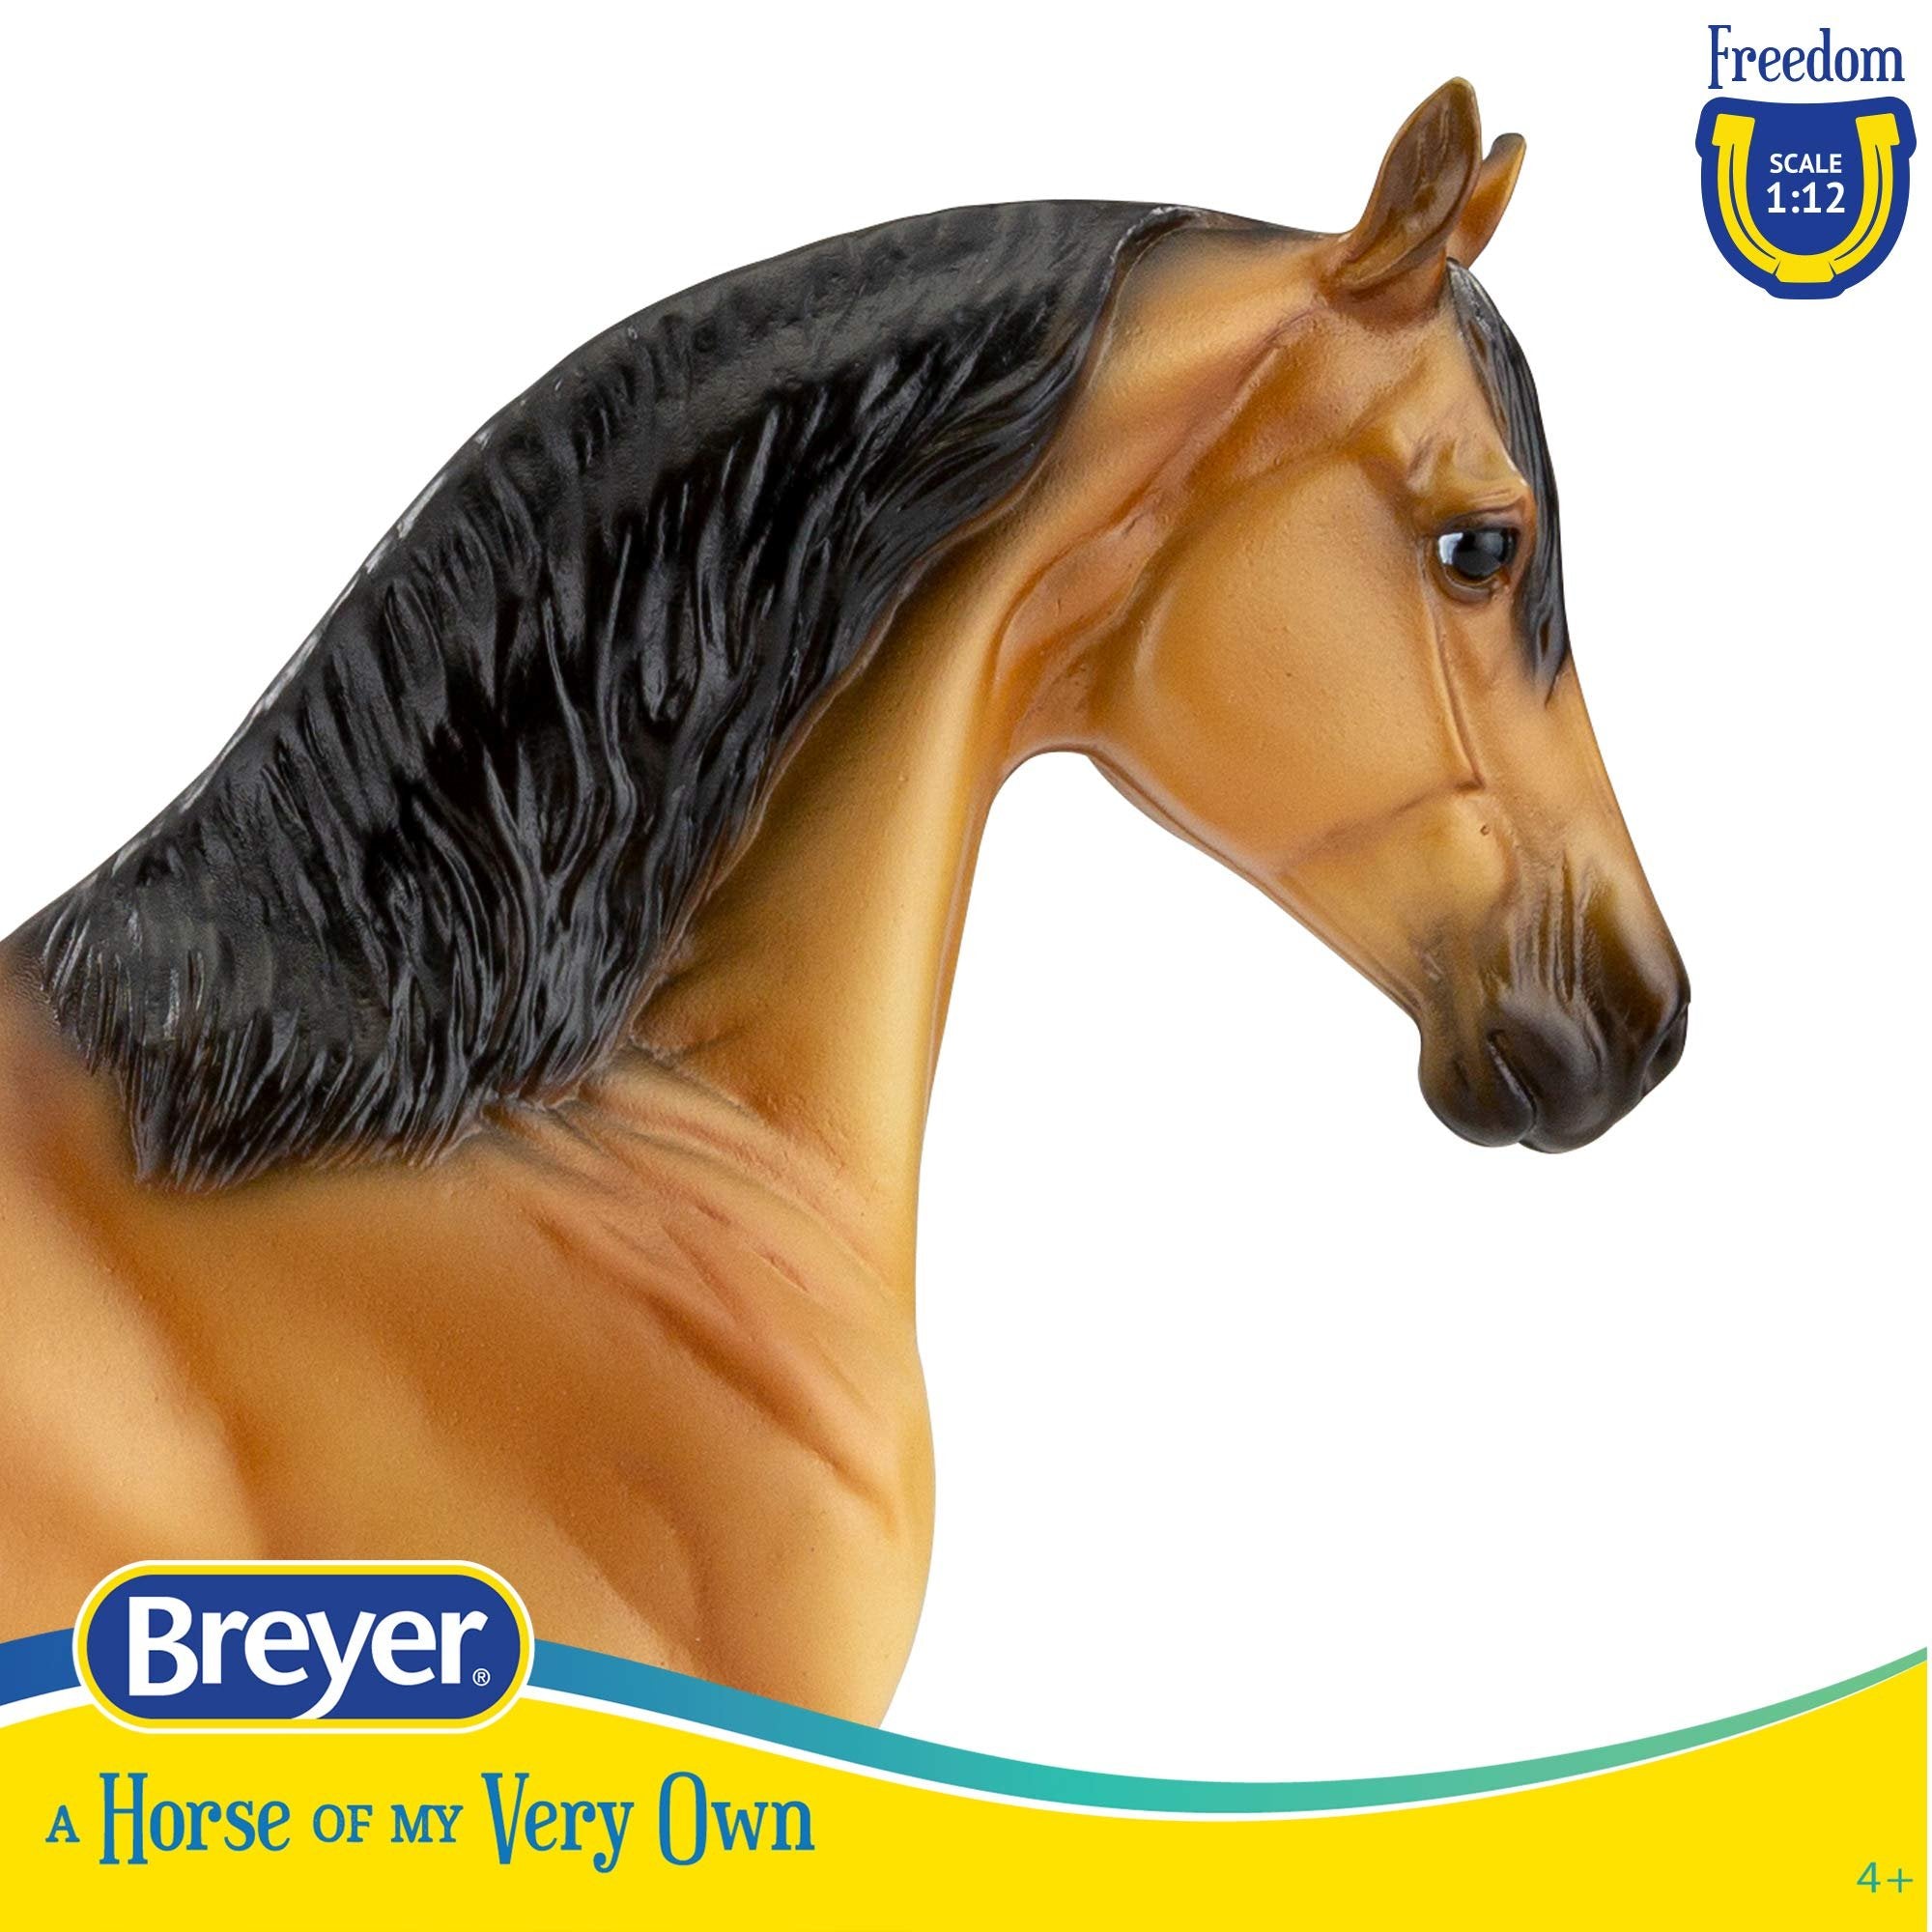 Breyer Horses Freedom Series Spanish Mustang Family | 3 Horse Set | Horse Toy | 9.75" x 7" | 1:12 Scale | Horse Toy | Model #5490